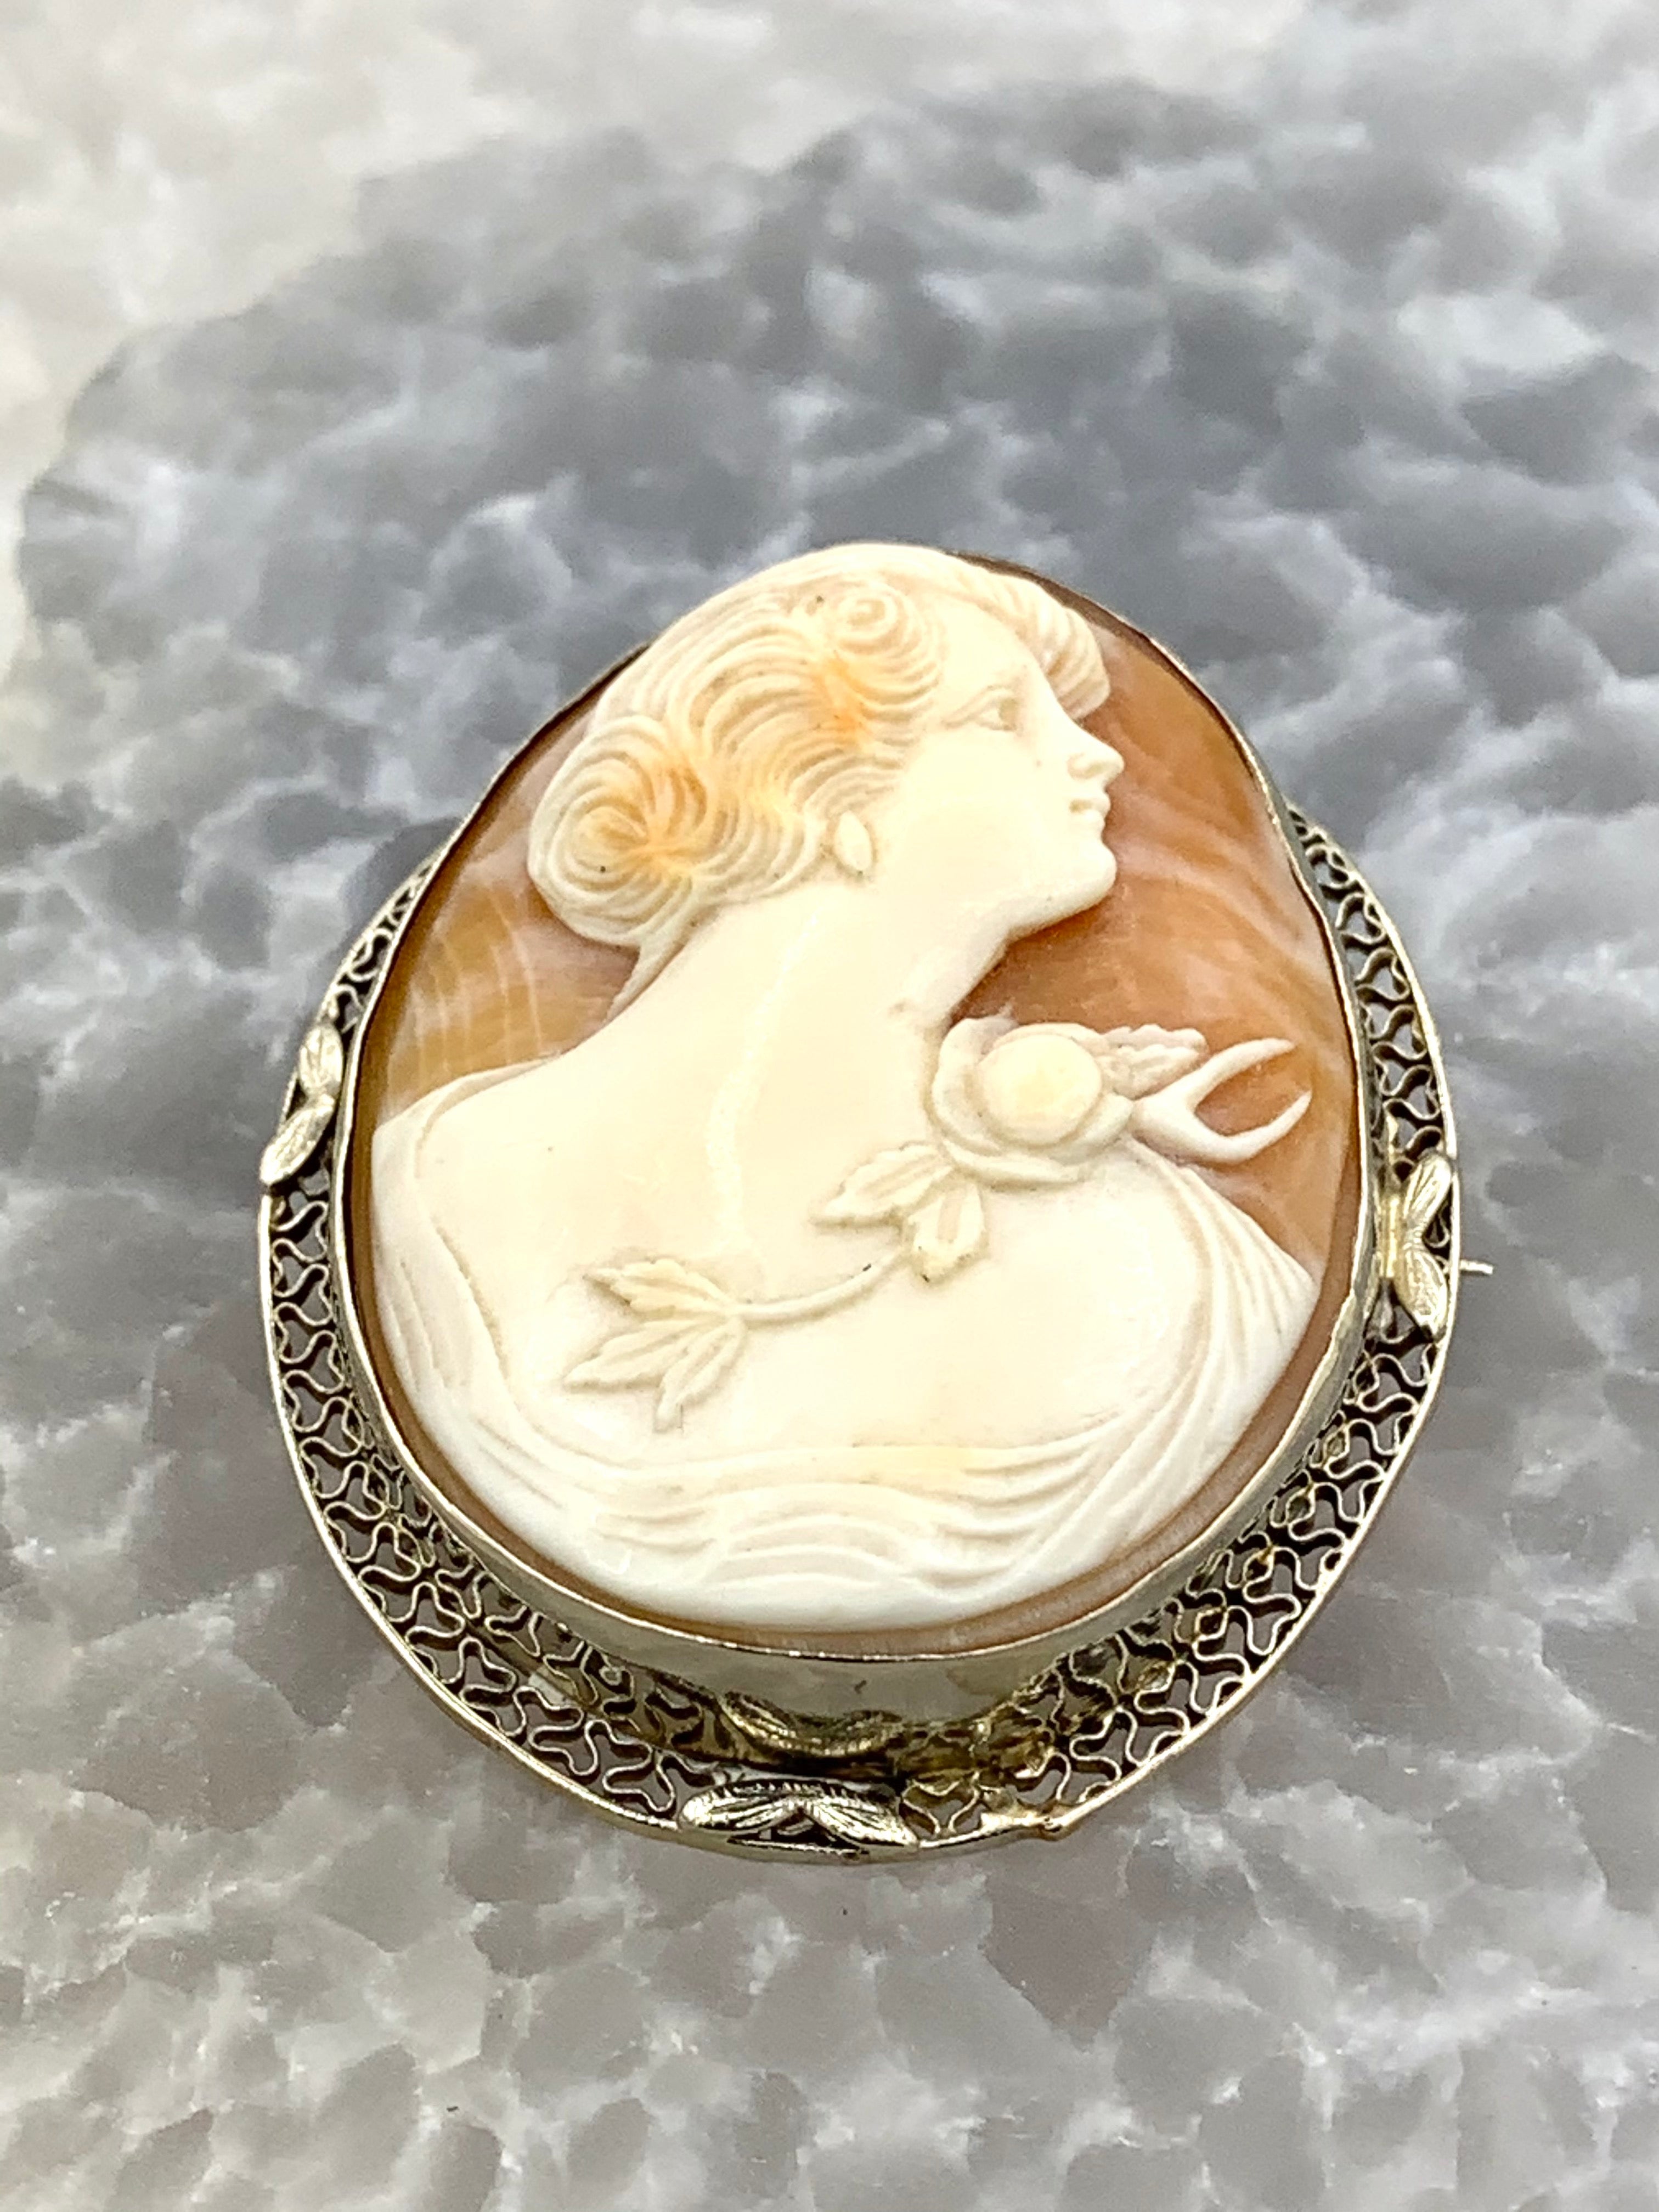 Hand Carved Shell Cameo Brooch with Bail